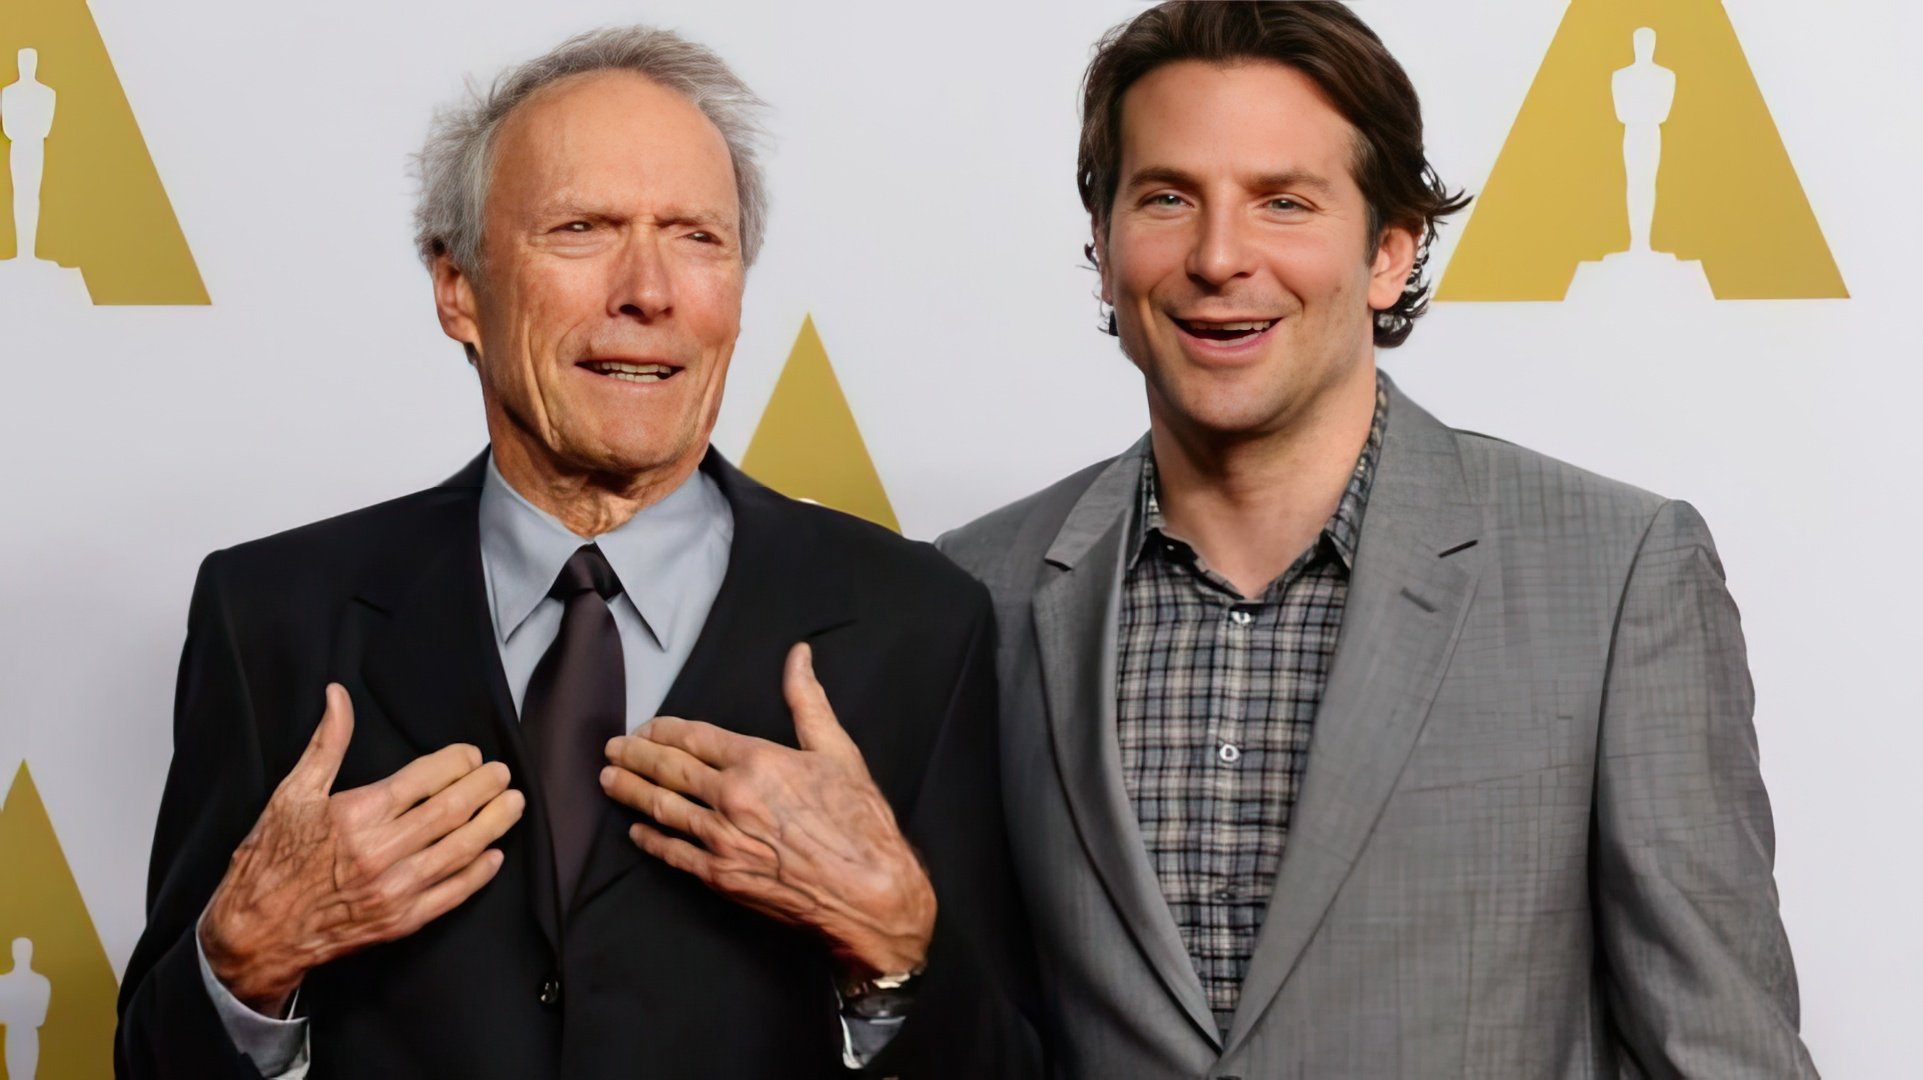 Pictured: Bradley Cooper and Clint Eastwood